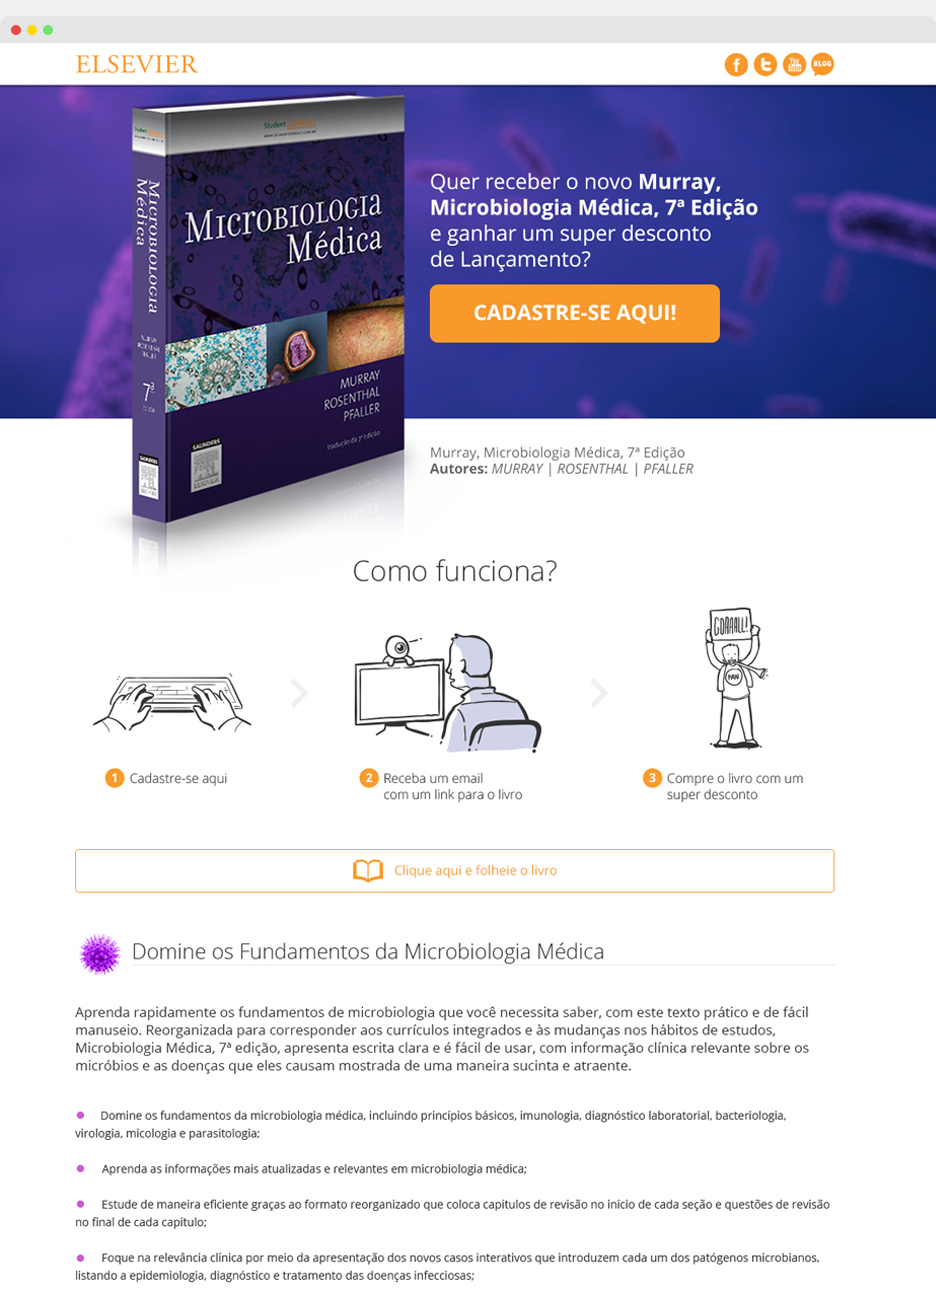 Landing Page Murray - Elsevier